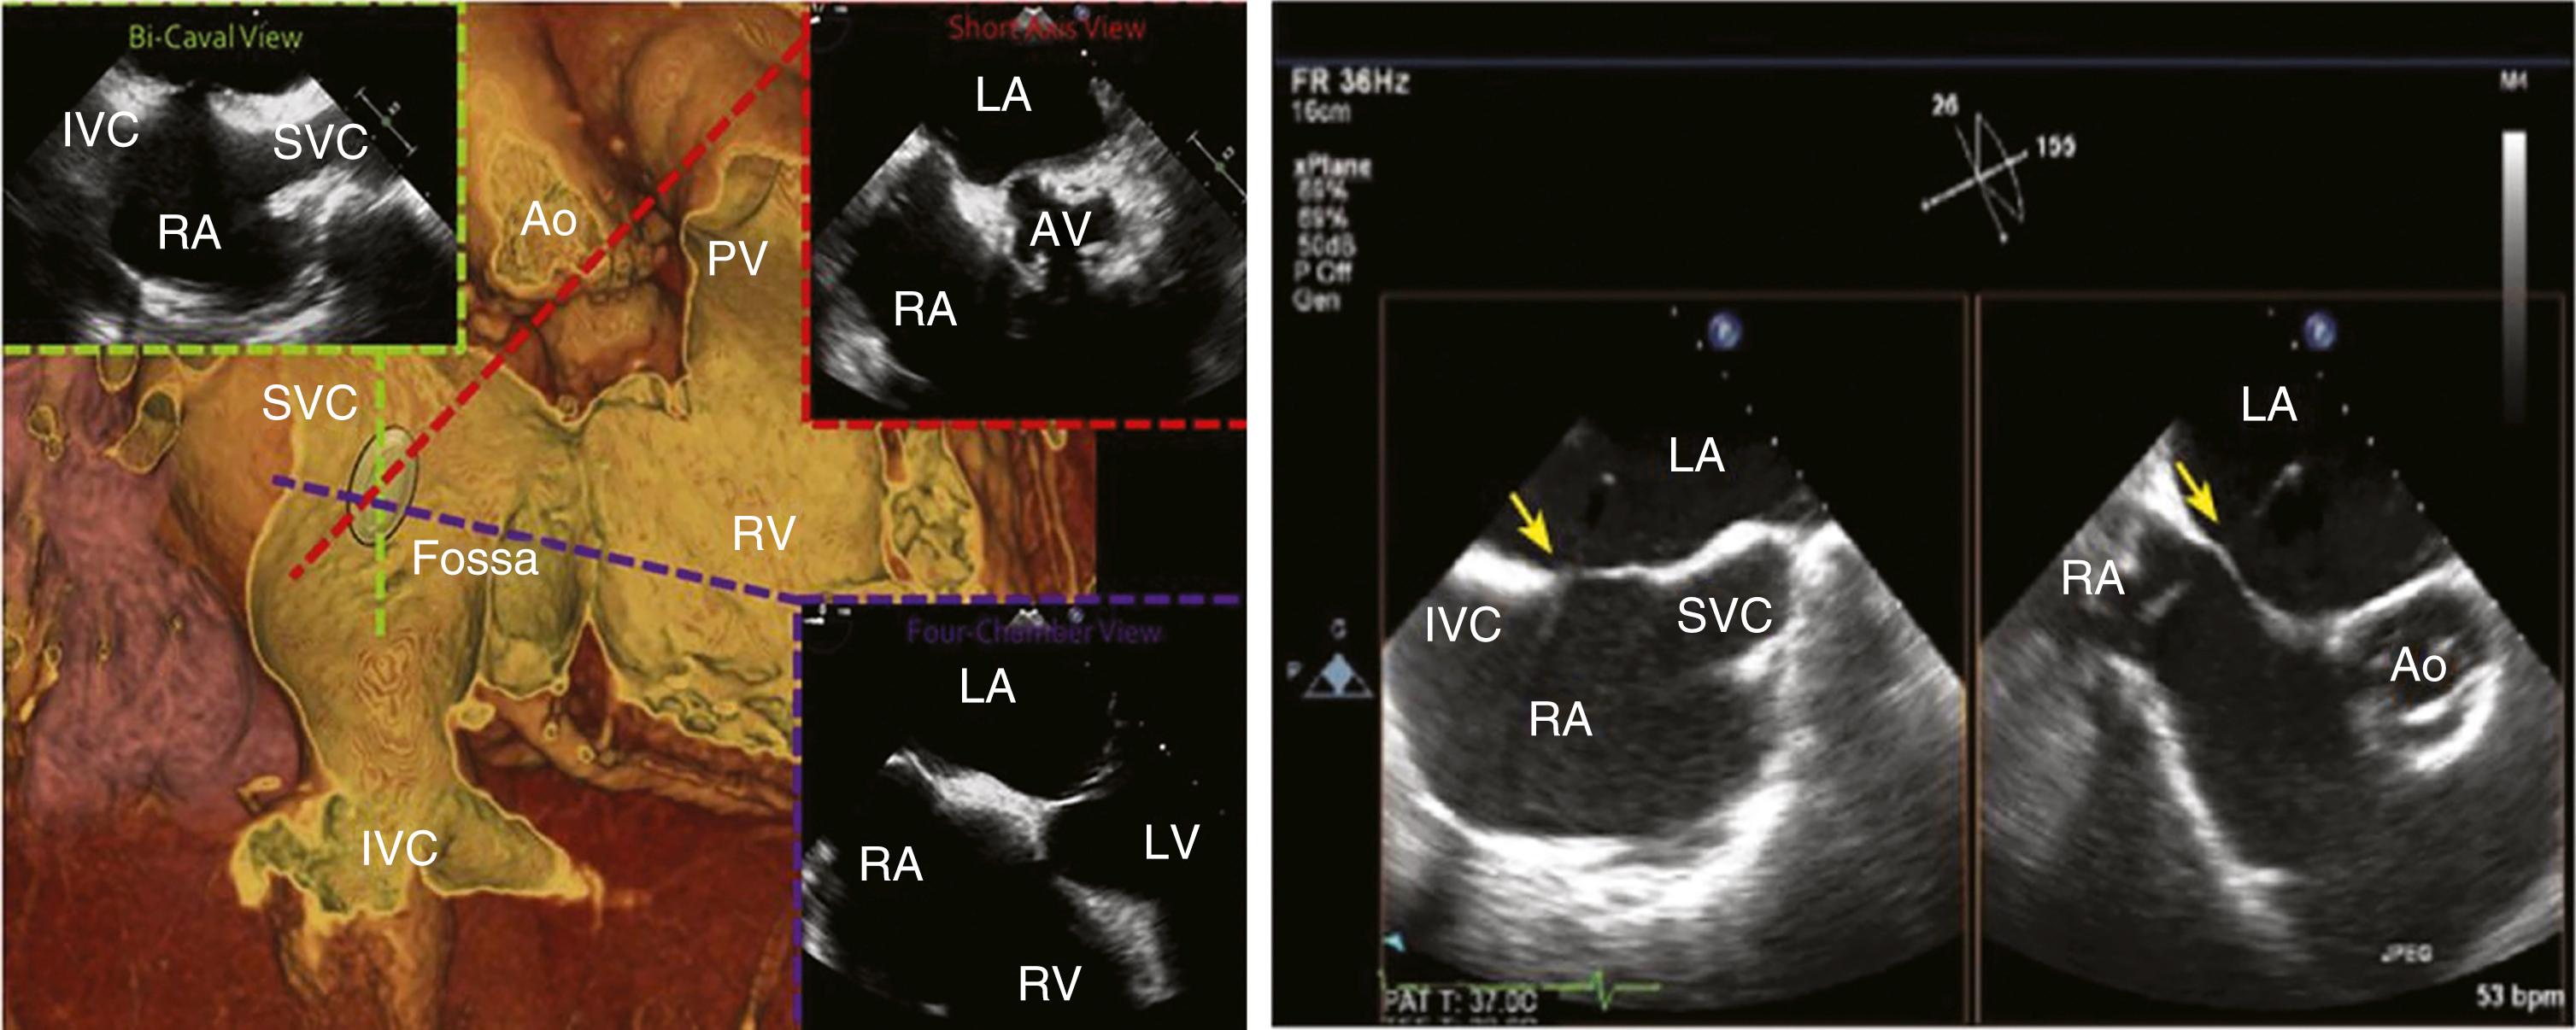 FIGURE 22.8, Biplane transesophageal echocardiography for transseptal puncture. AV, Aortic valve; PV, pulmonary vein; SVC, superior vena cava; other abbreviations as in Figure 22.2.